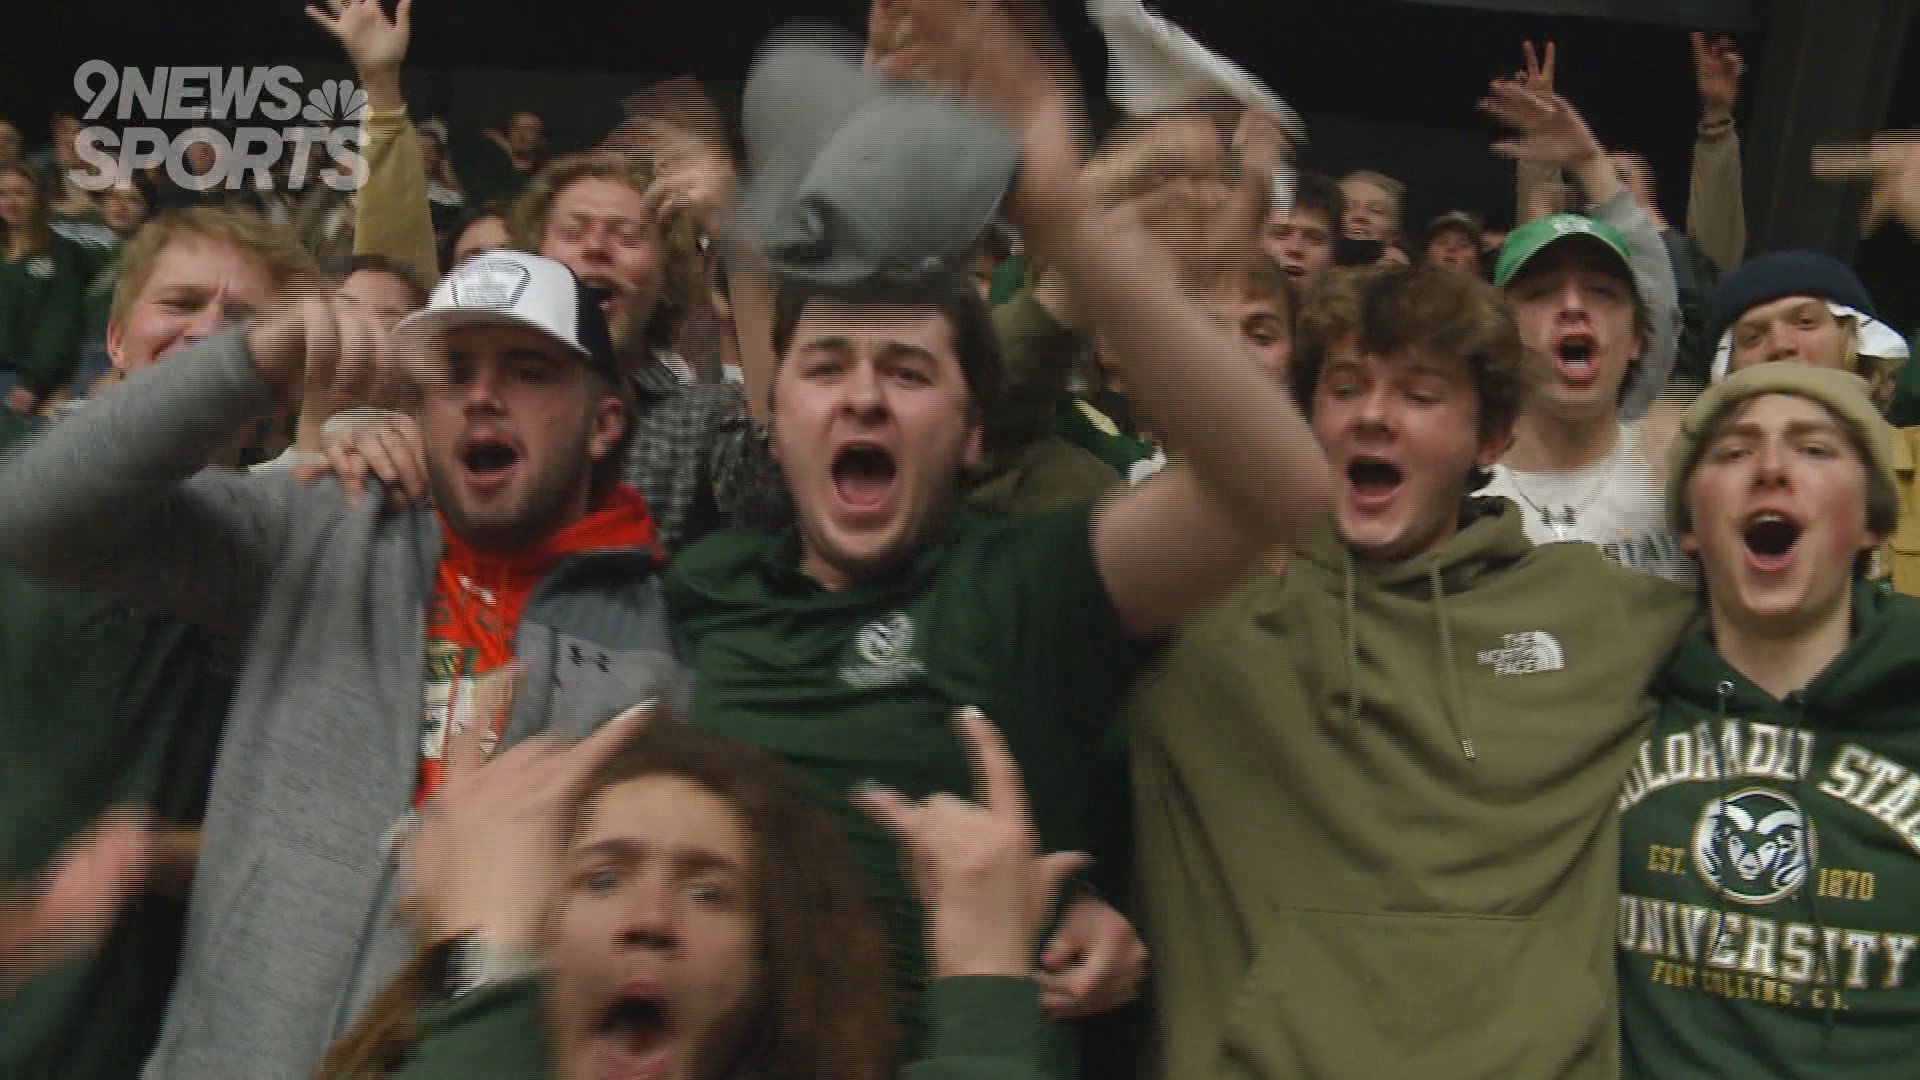 Students and fans have packed Moby Arena on a regular basis to watch the Colorado State men's basketball team.